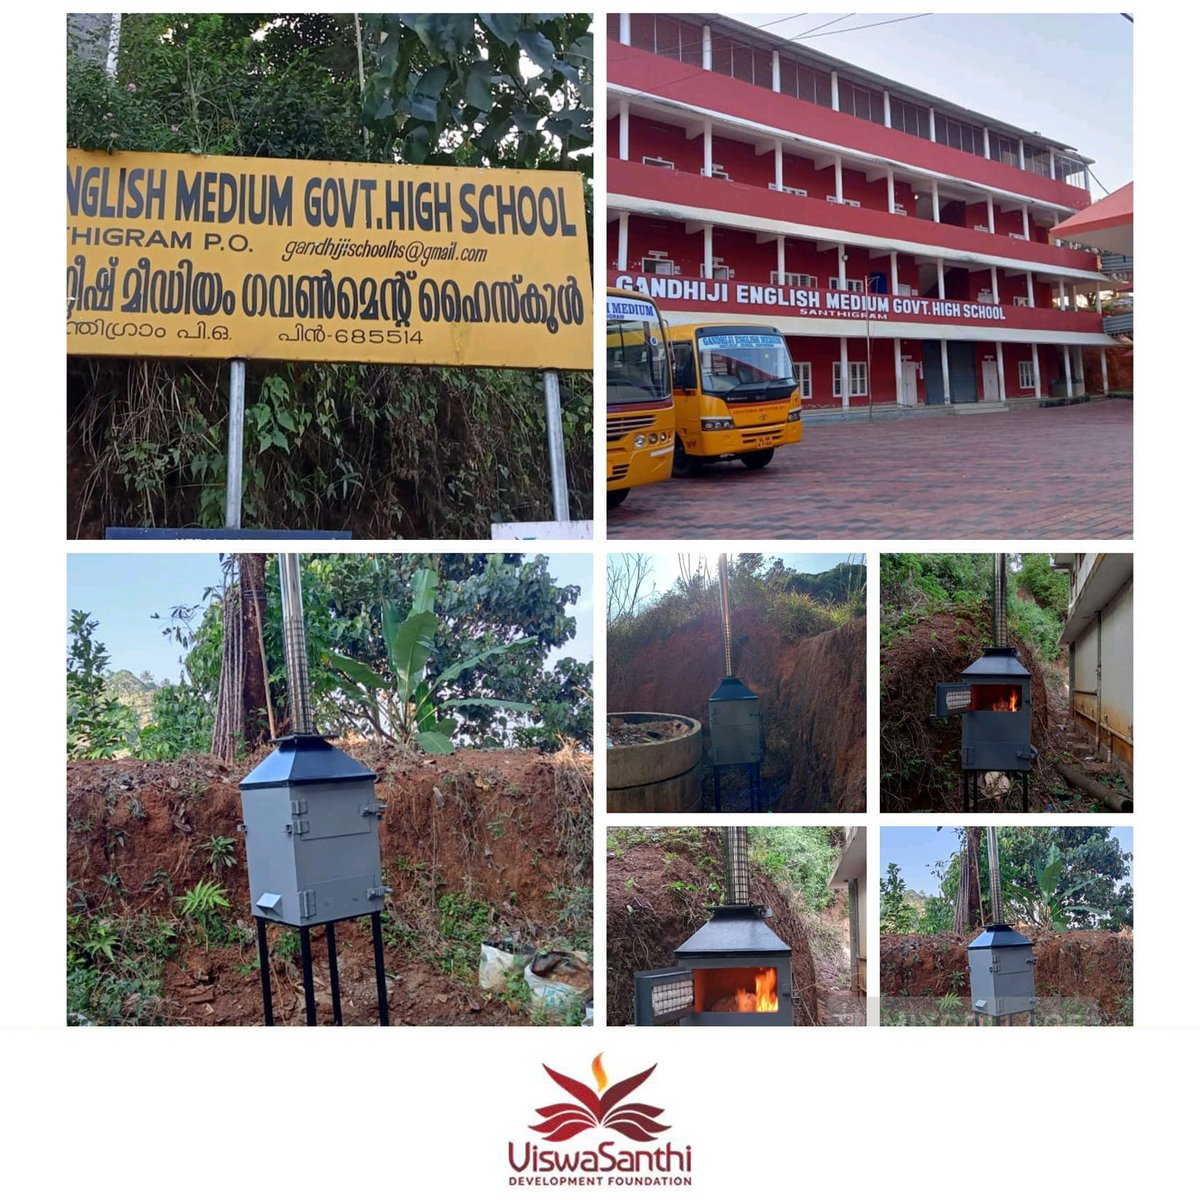 The #viswasanthifoundation and #EYGDS installed four incinerators at Gandhiji English Medium Govt. High School in Santhigram. The #idukkiorumidukki scheme was selected through the CSR Conclave to be a part of this project. #mohanlal #school #students #projects #idukki #kerala